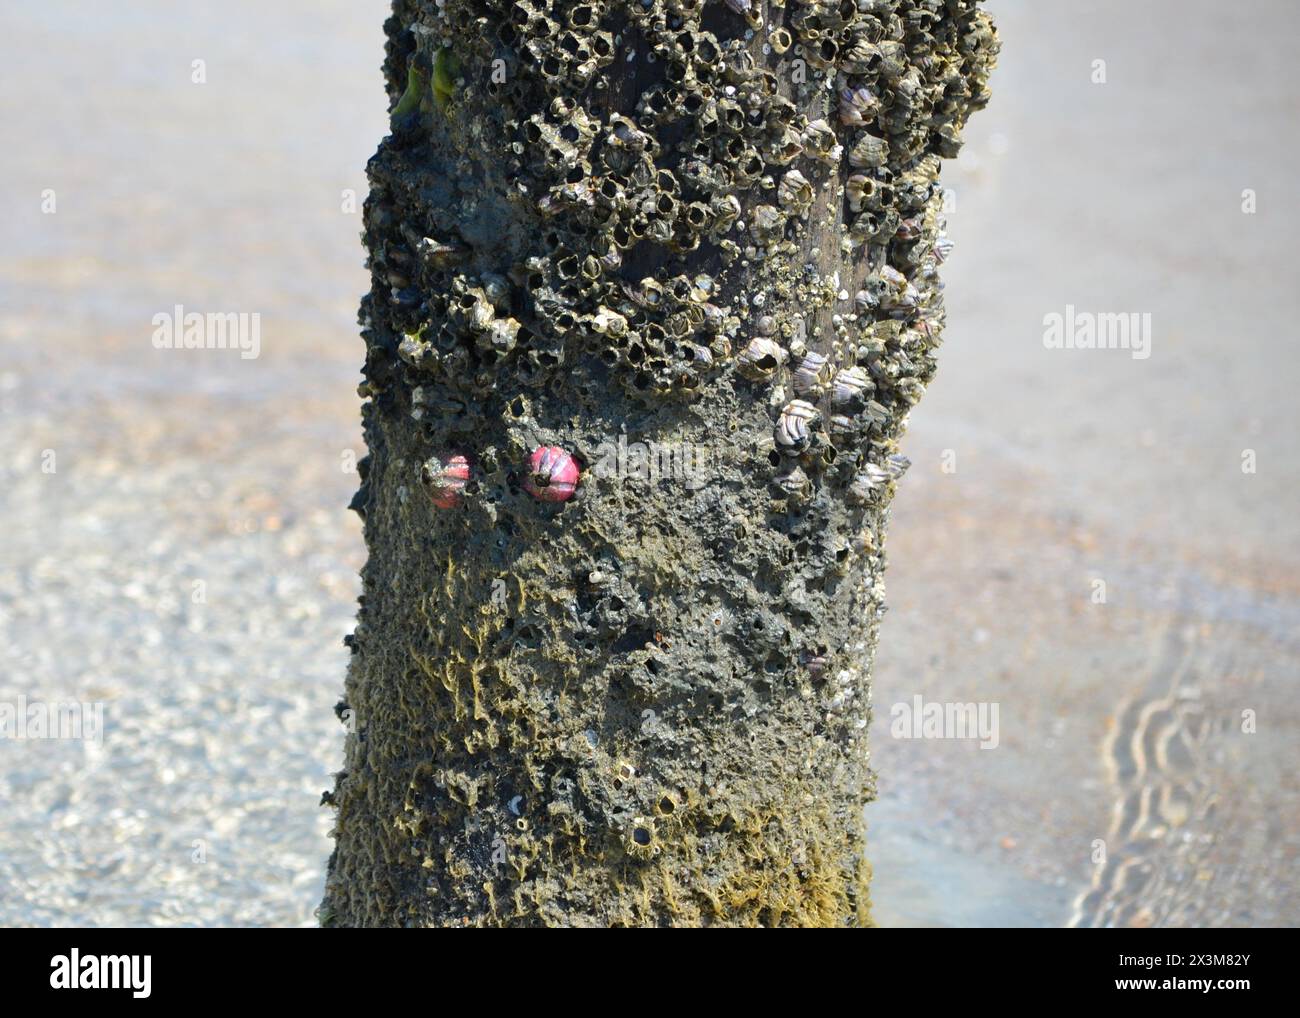 Rare pink titan acorn barnacles, large species with calcareous plates forming a steep-sided cone on a wood pole piling at Ponce Inlet Beach, Florida. Stock Photo